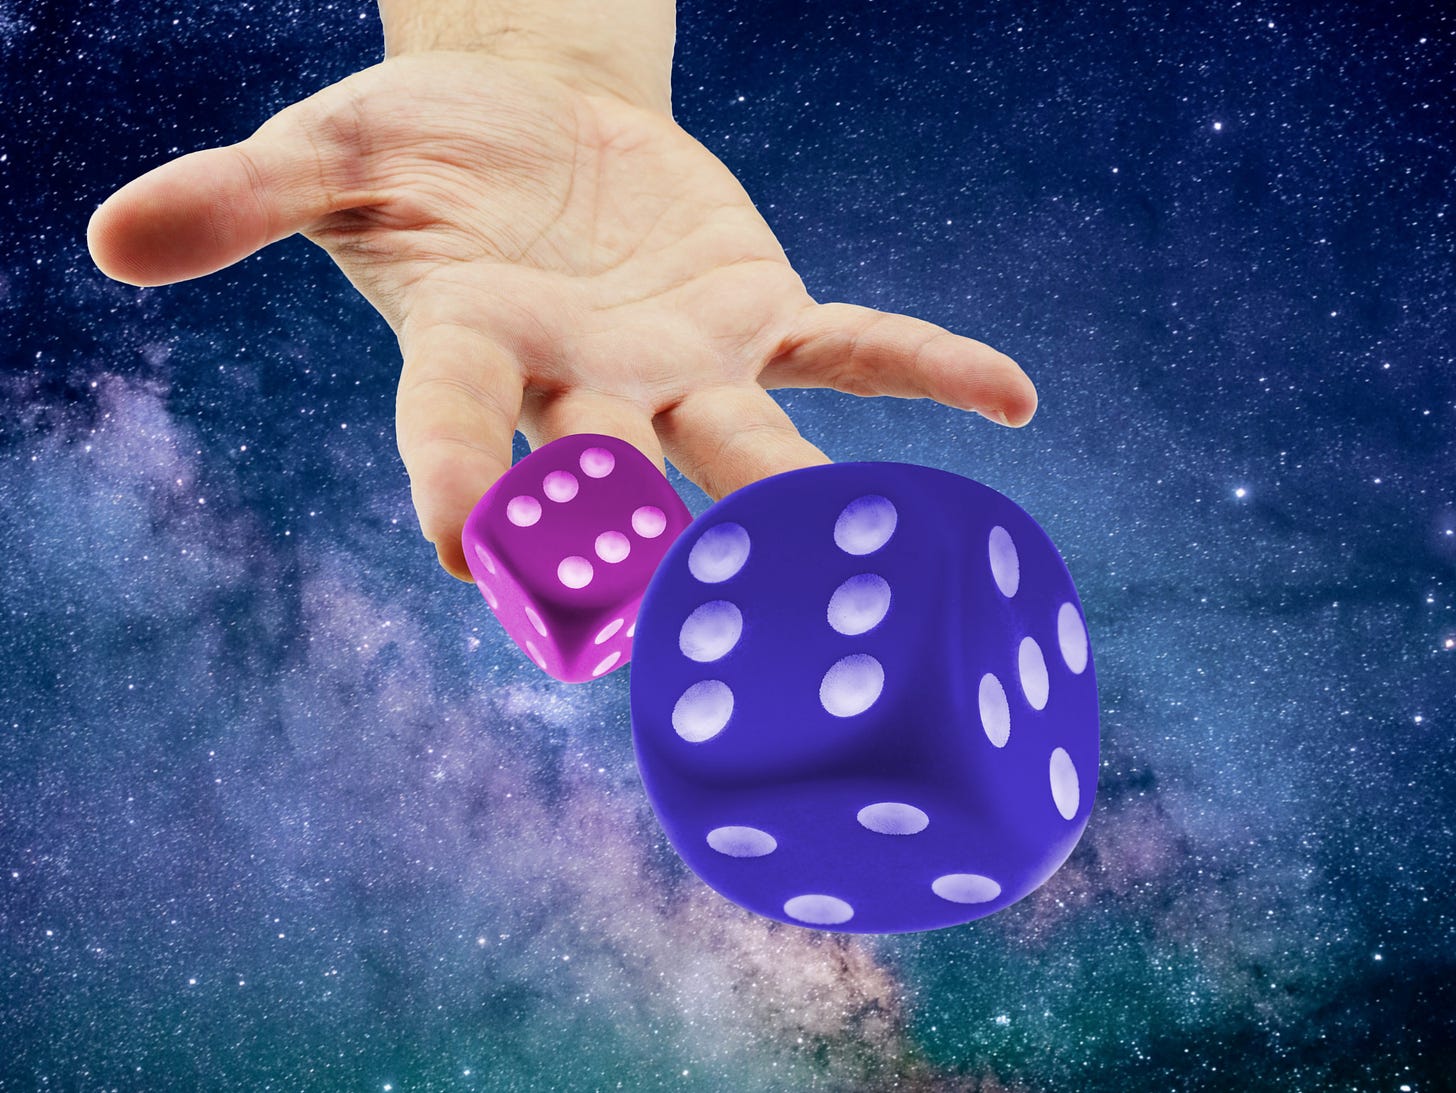 A hand throws dice against a cosmic backdrop with stars